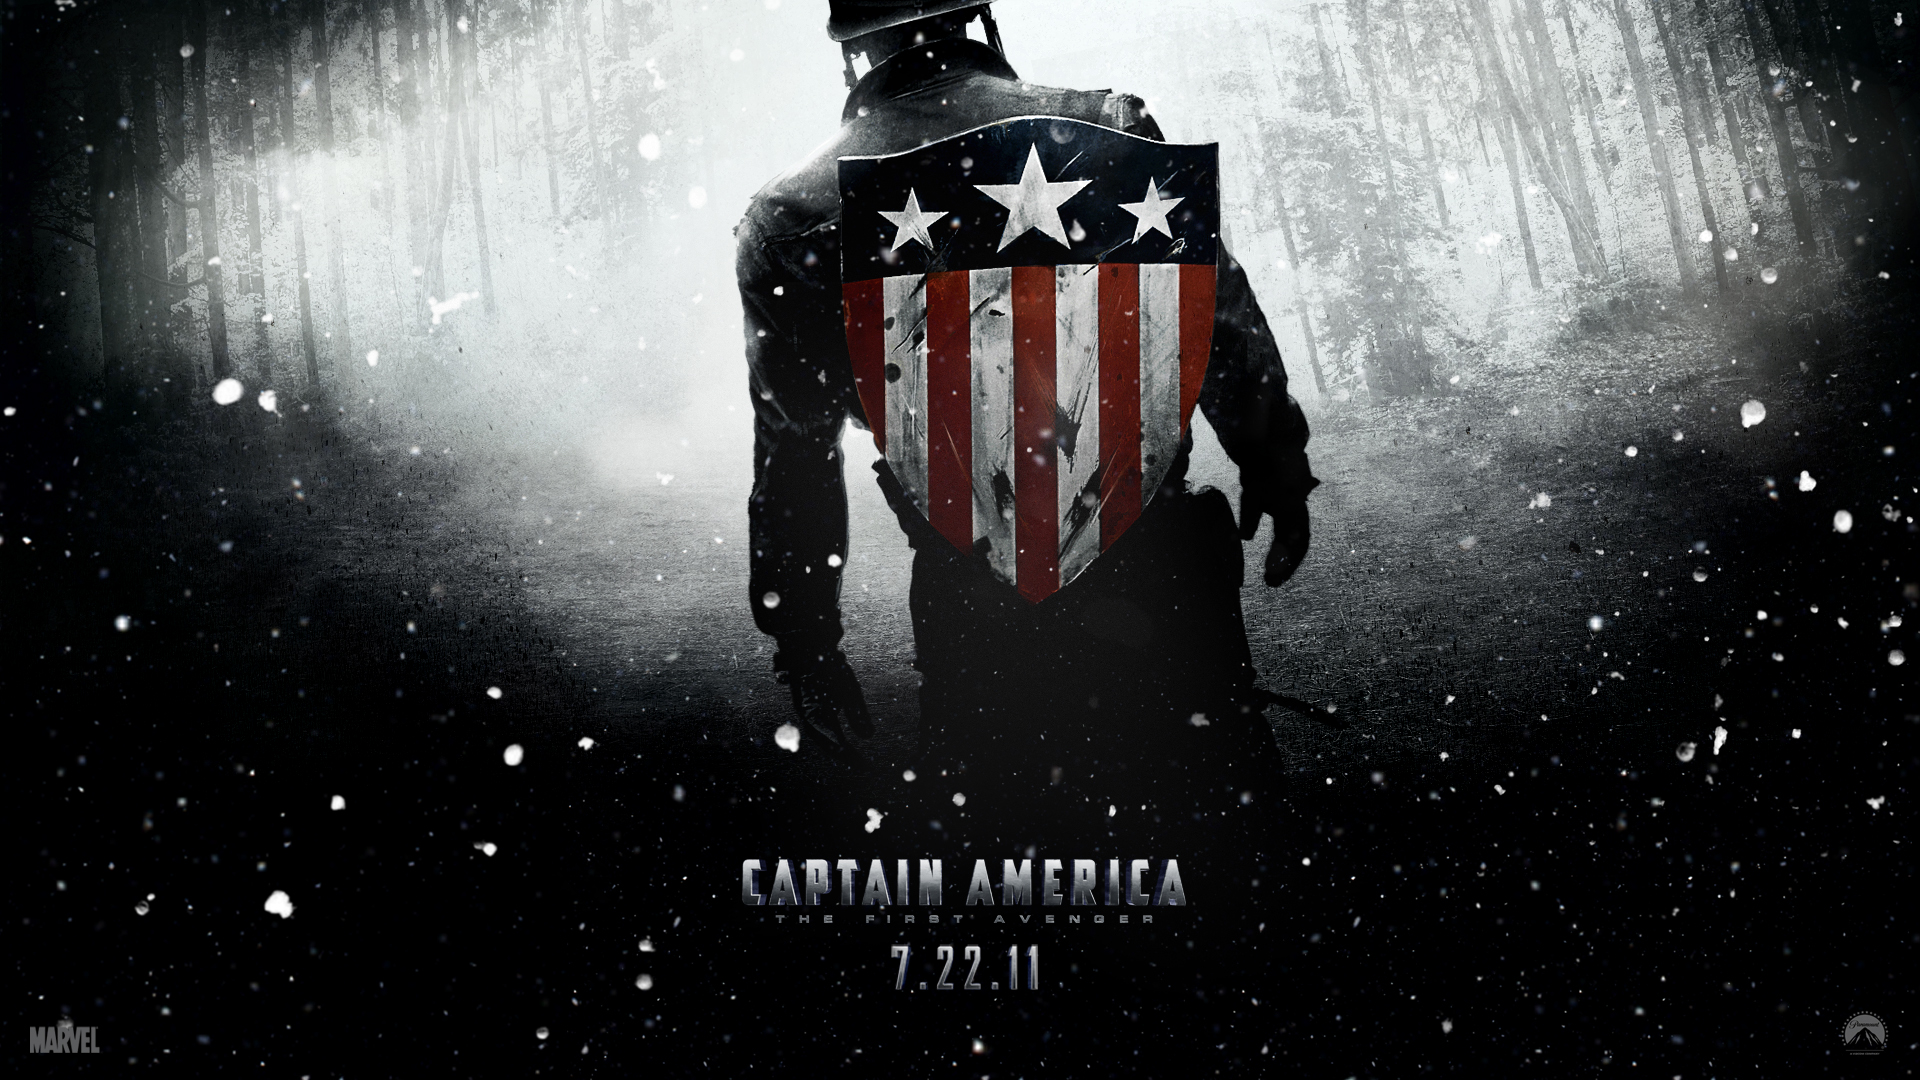 Get Your High Resolution Wallpaper from Captain America: The First Avenger